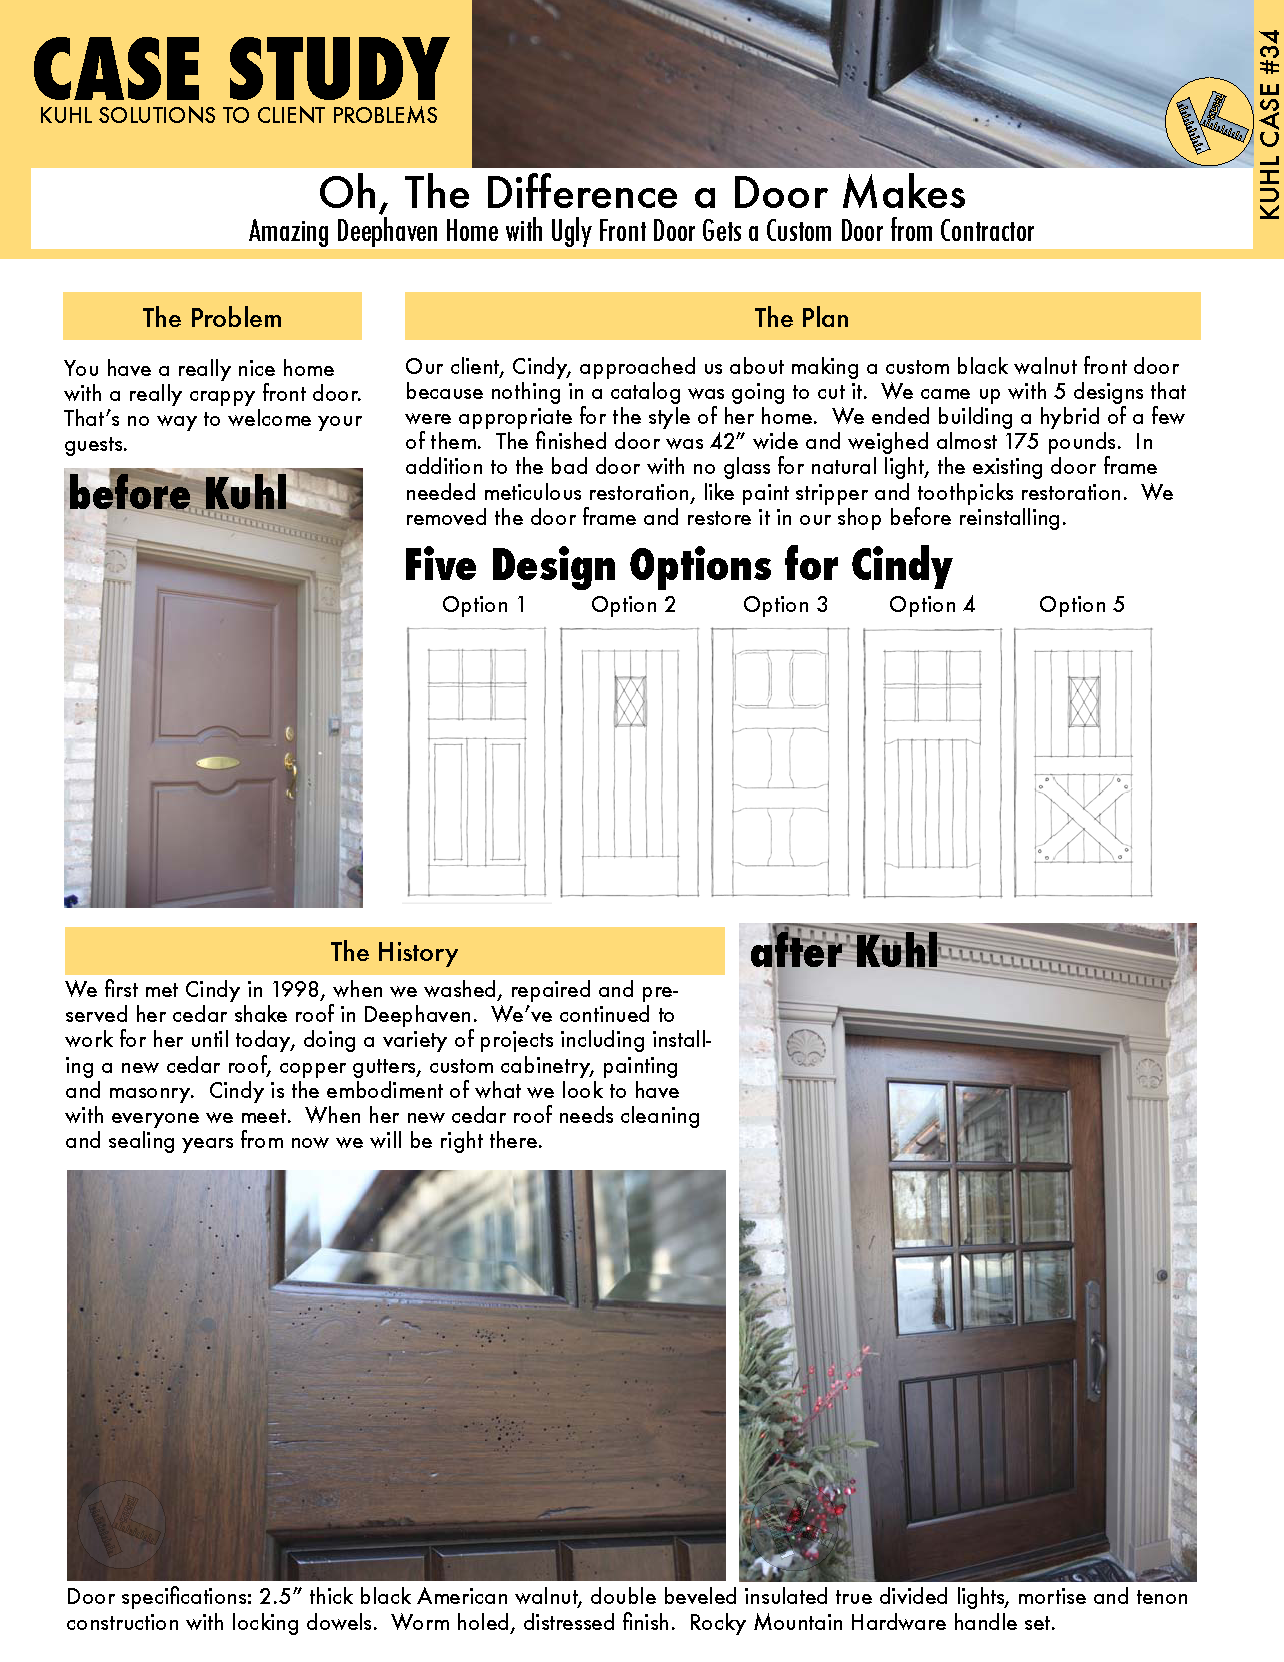 Oh, The Difference a Door Makes: Custom Door for Minneapolis Home